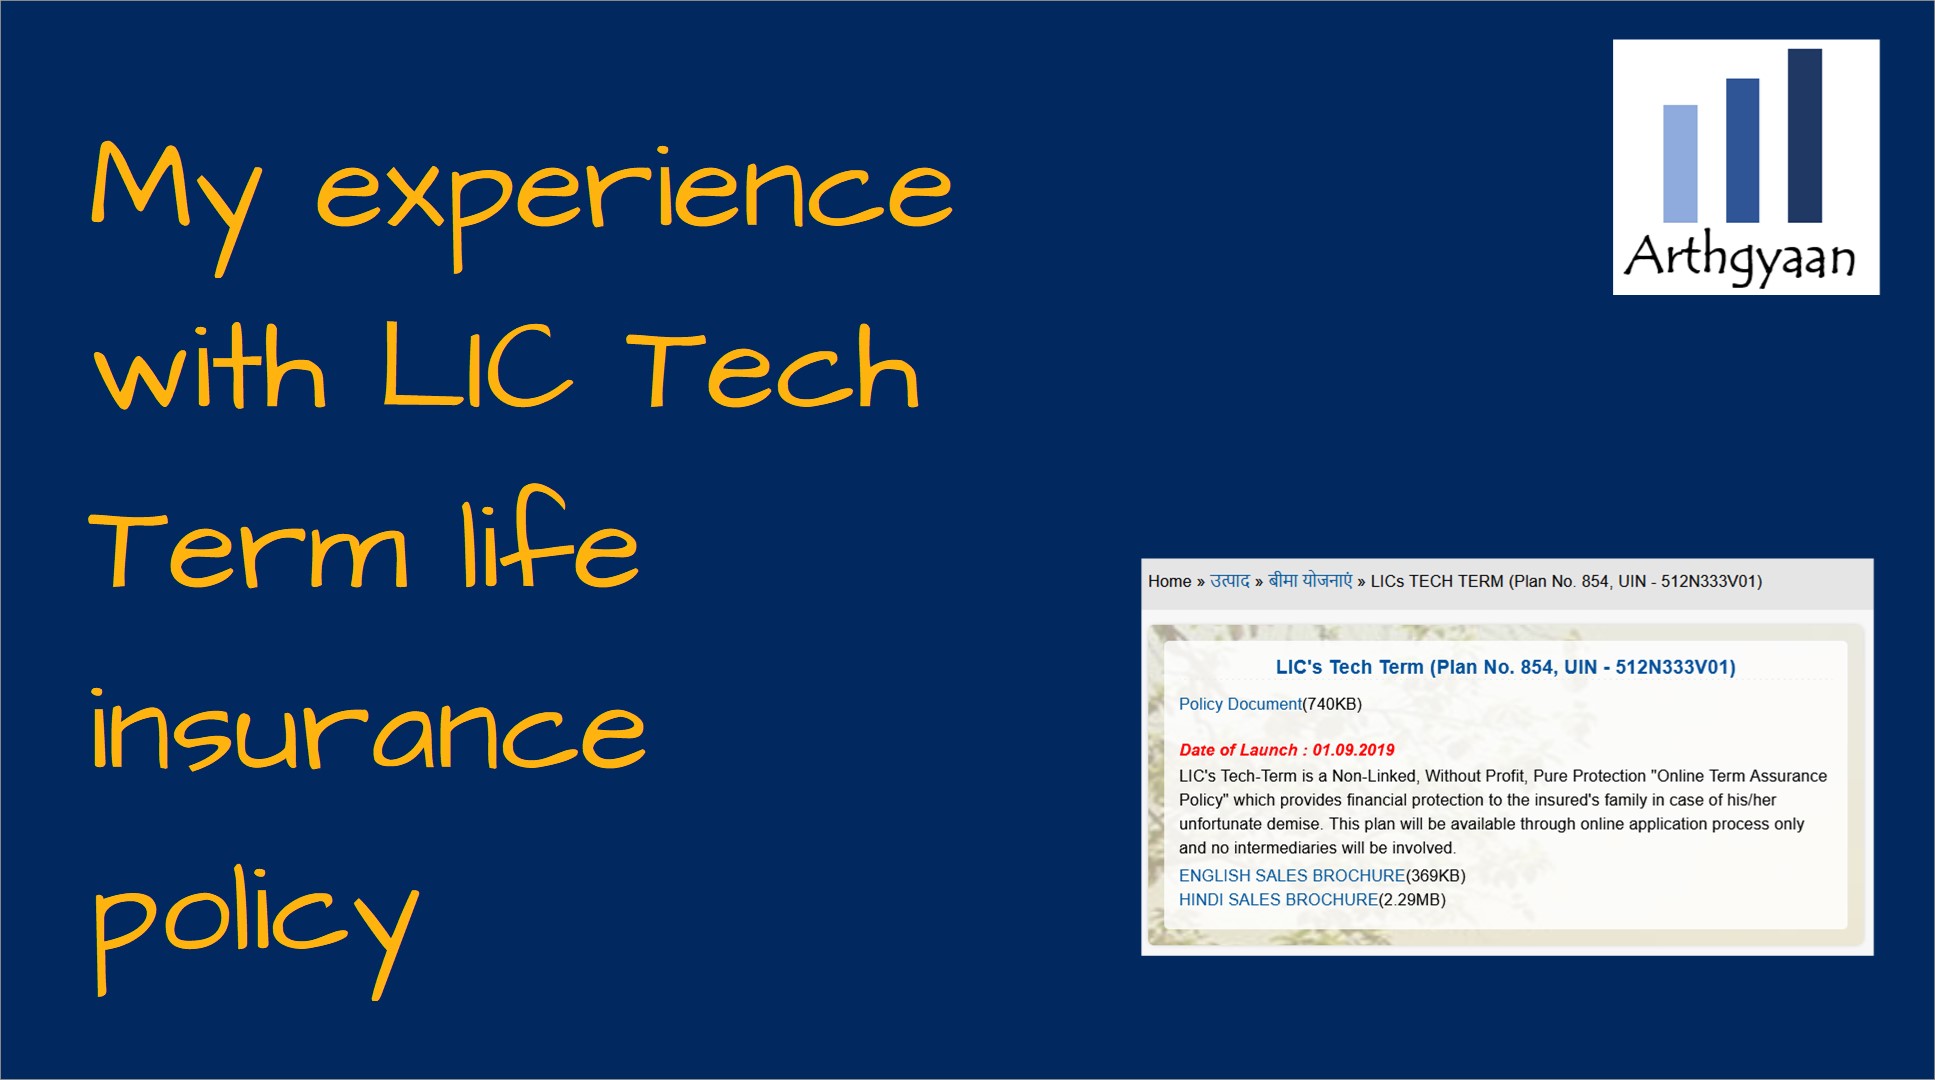 My experience with LIC Tech Term life insurance policy